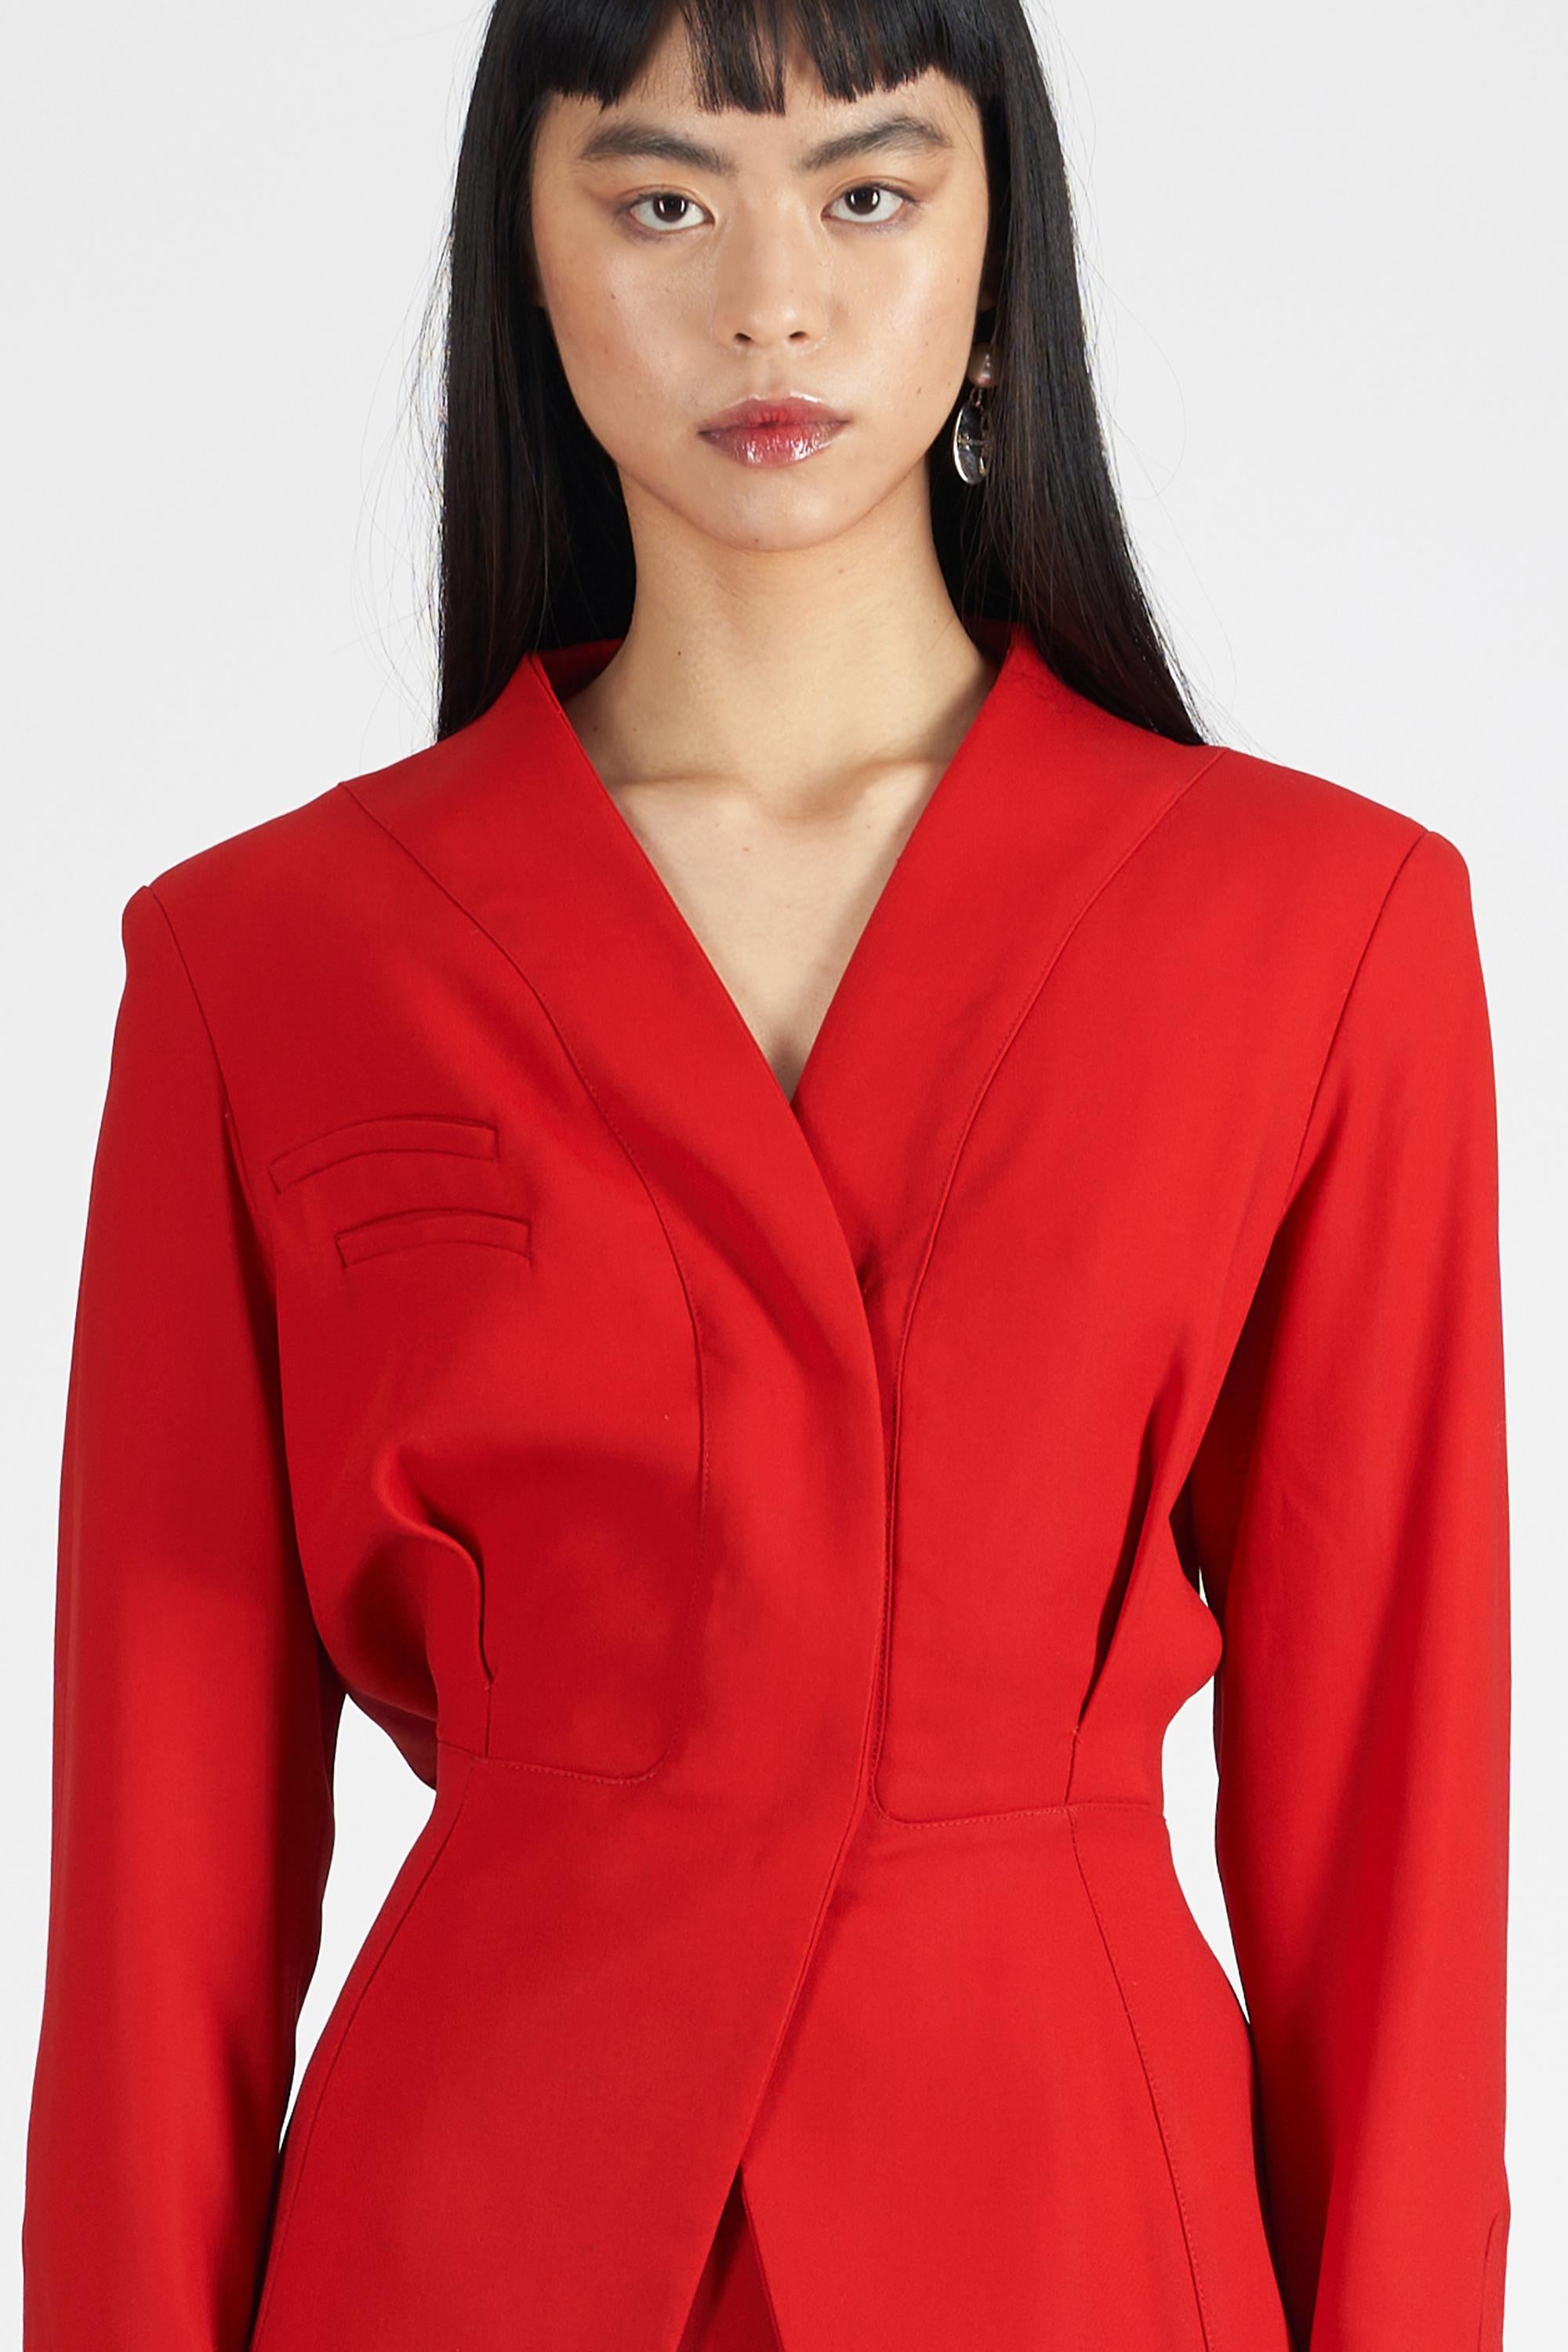 Red Thierry Mugler Vintage 1990’s Skirt Suit For Sale